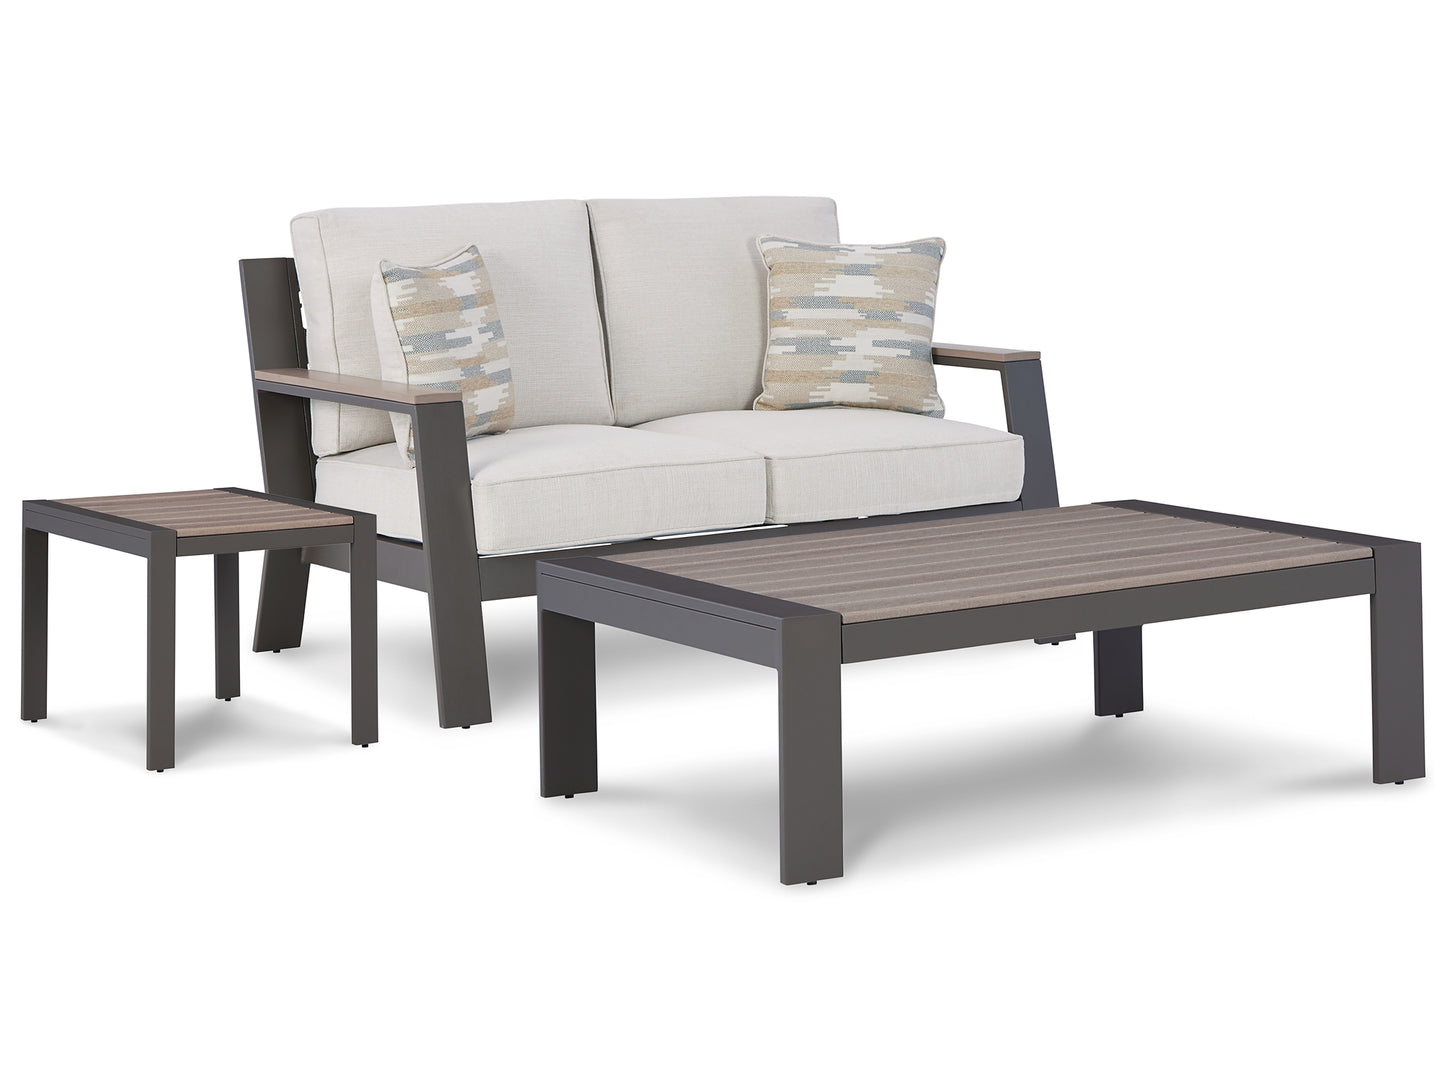 Tropicava Outdoor Loveseat with Coffee Table and End Table Wilson Furniture (OH)  in Bridgeport, Ohio. Serving Moundsville, Richmond, Smithfield, Cadiz, & St. Clairesville